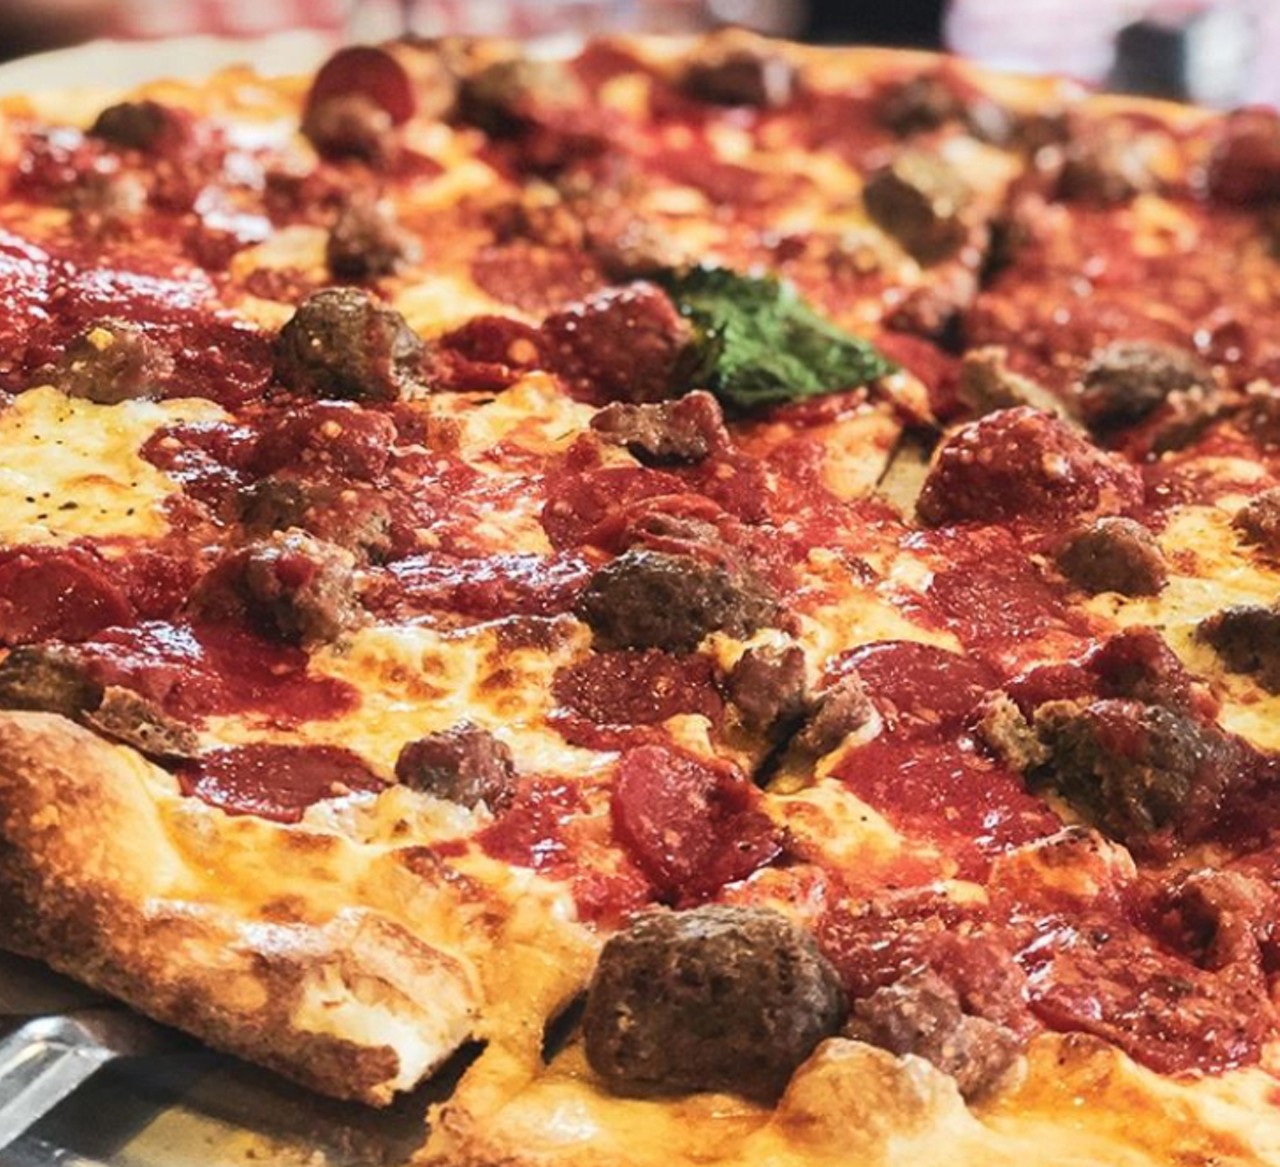 Grimaldi&#146;s
Multiple locations. grimaldispizzeria.com  
Meal deals for two or four people, plus 50% off bottled wine is available at Grimaldi&#146;s locations coast-to-coast. In addition to carry out, Grimaldi&#146;s is open for delivery through DoorDash, Uber Eats and GrubHub. 
Photo via @Grimaldispizzeria/Instagram